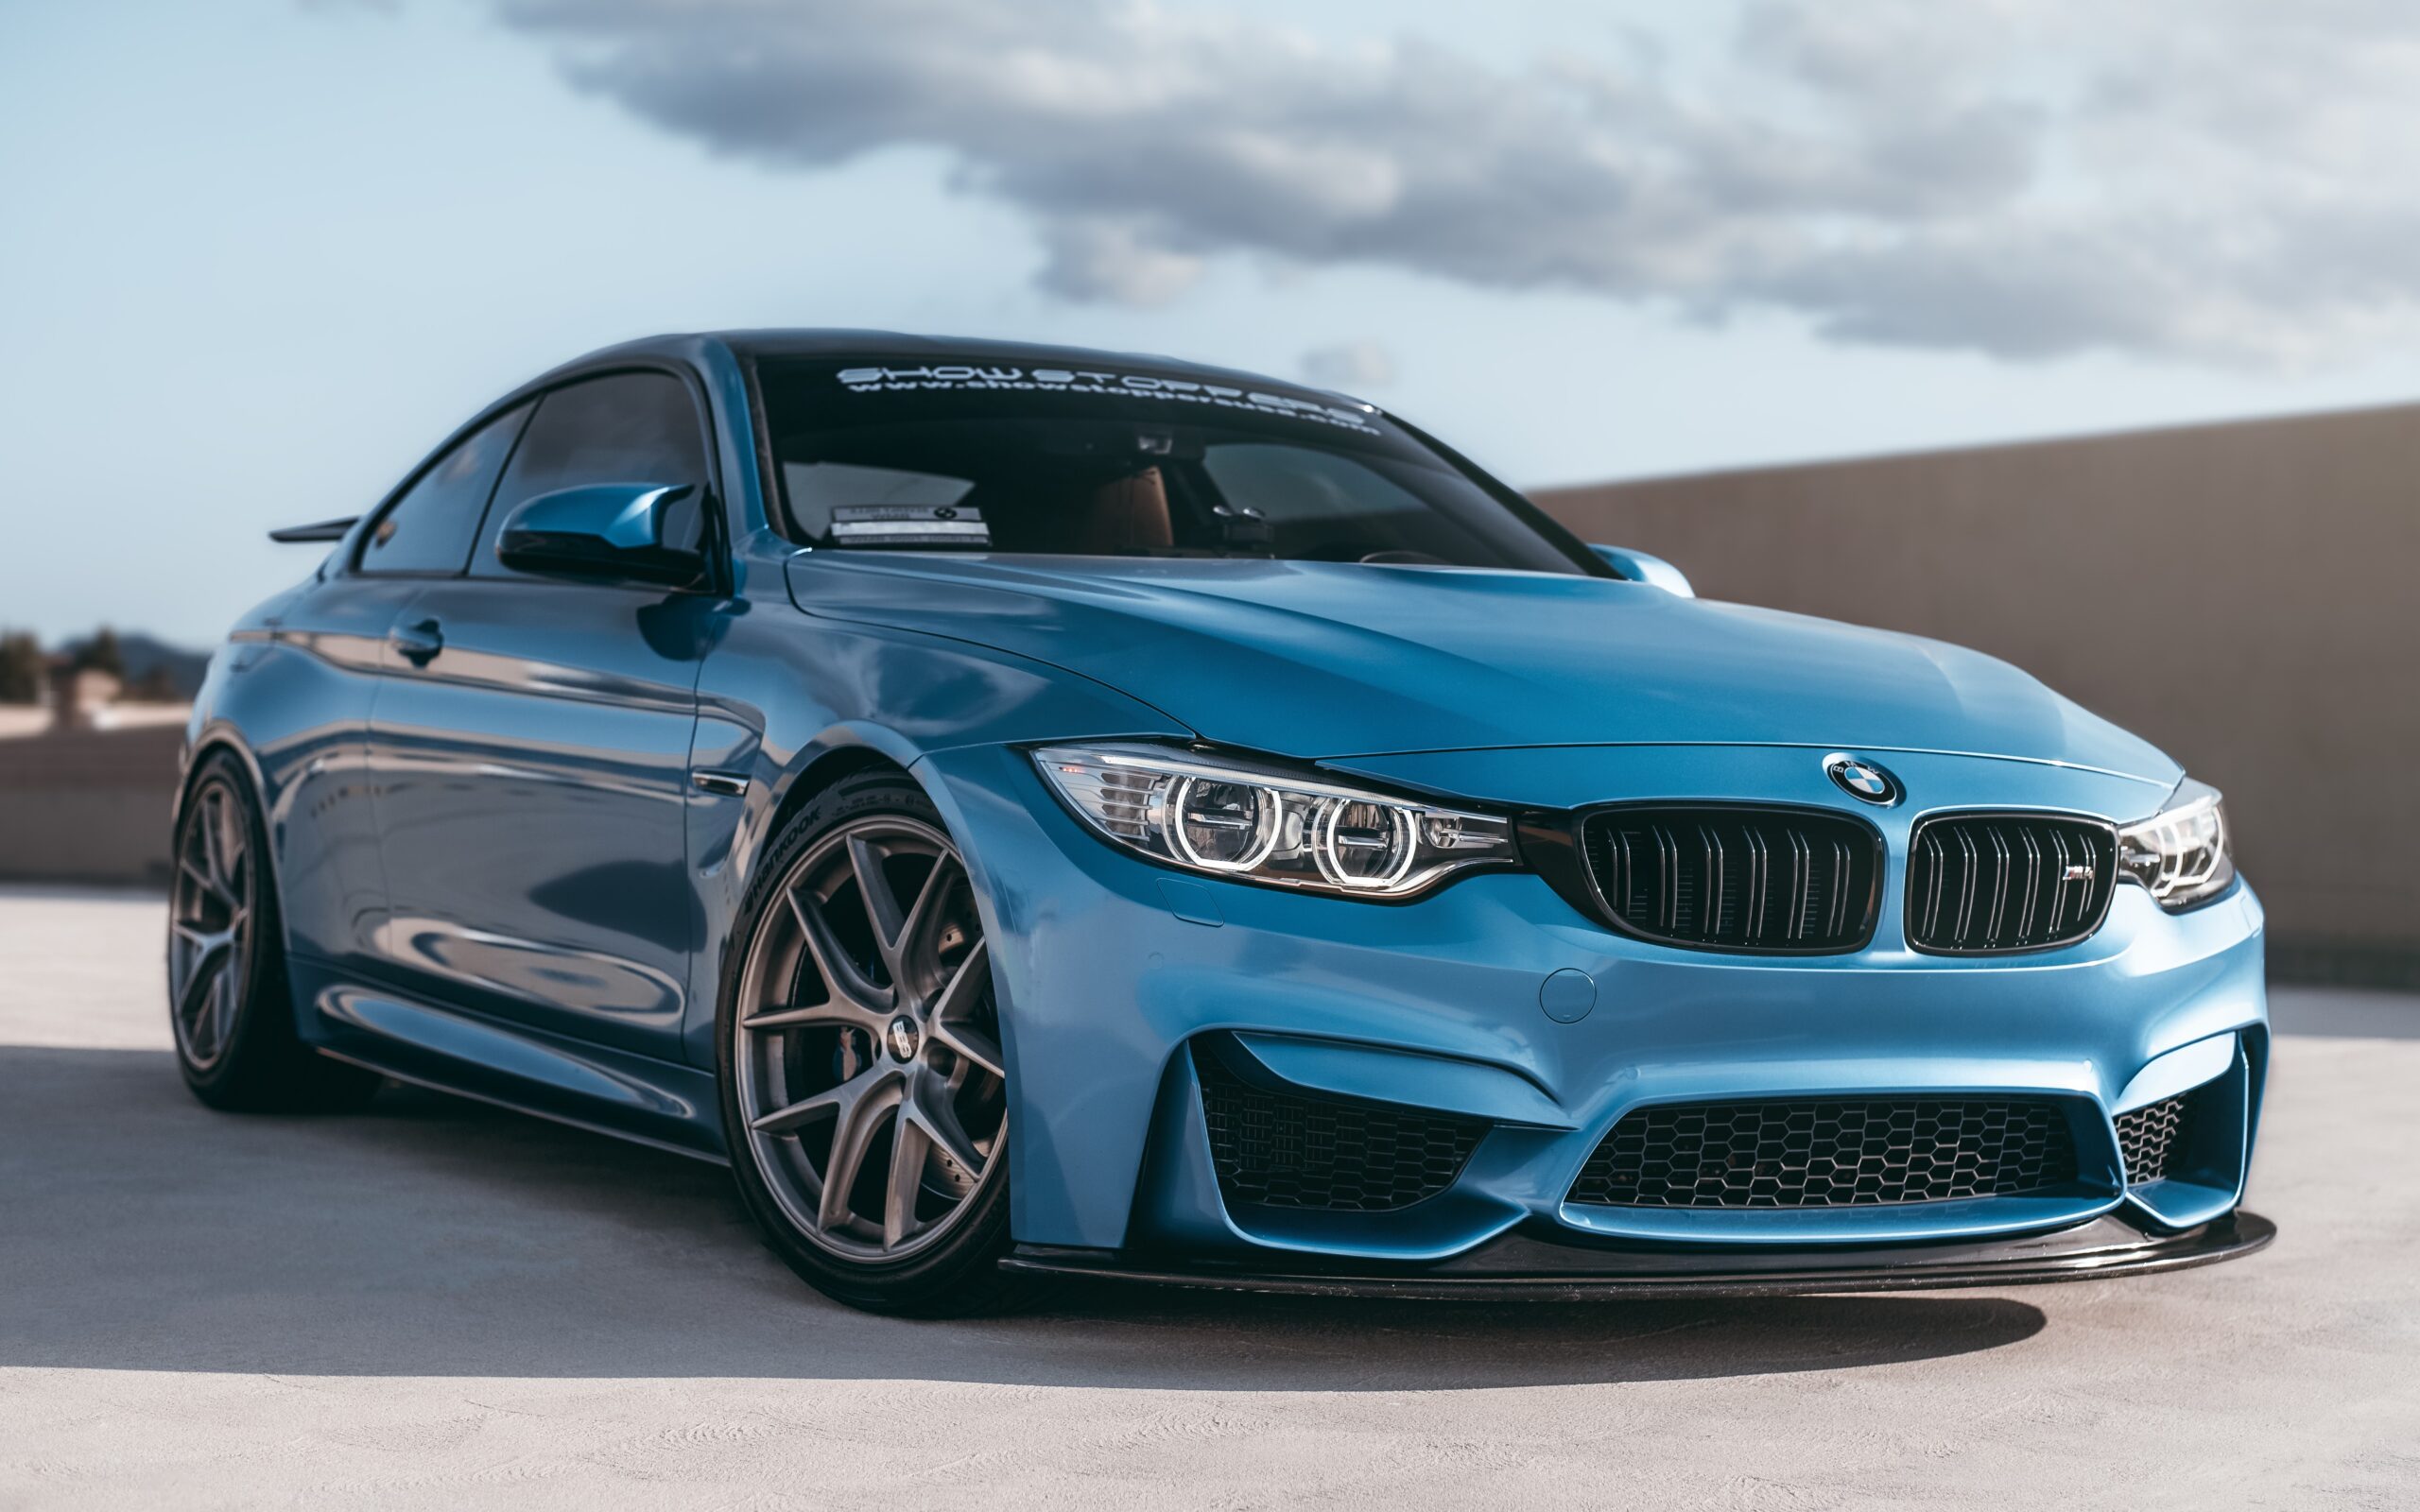 BMW M4 2014 Review